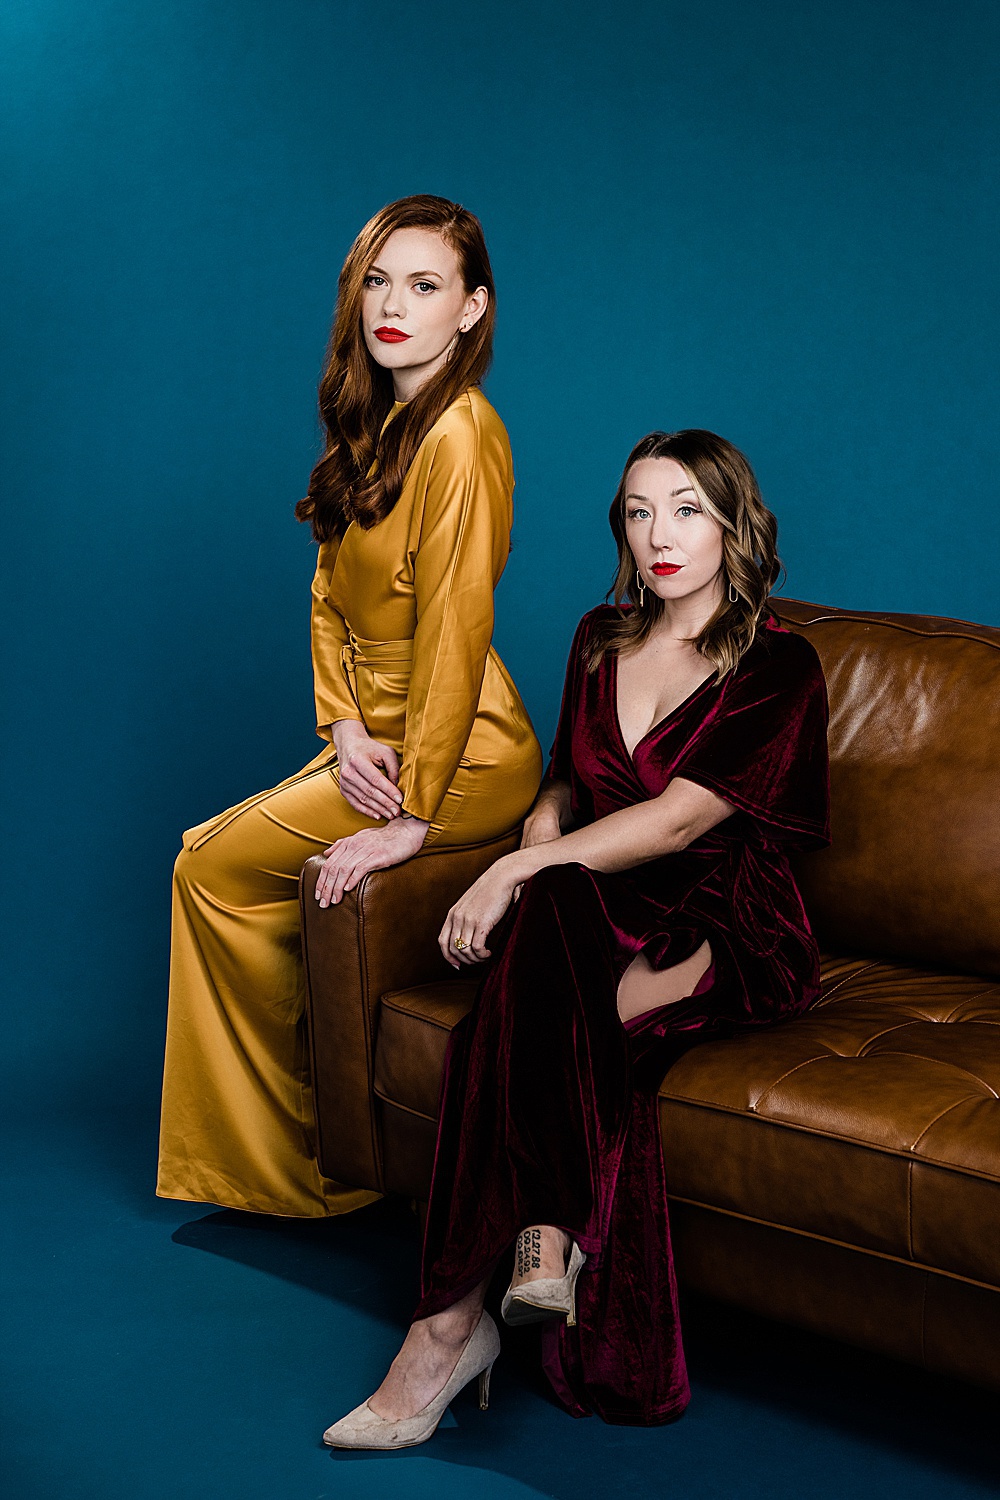 Lansing, Michigan commercial fashion photography, photo of two models - one in a yellow dress and one in a red velvet dress sitting on a brown couch on a seamless blue backdrop by Allie Siarto & Co., Lansing commercial photographer